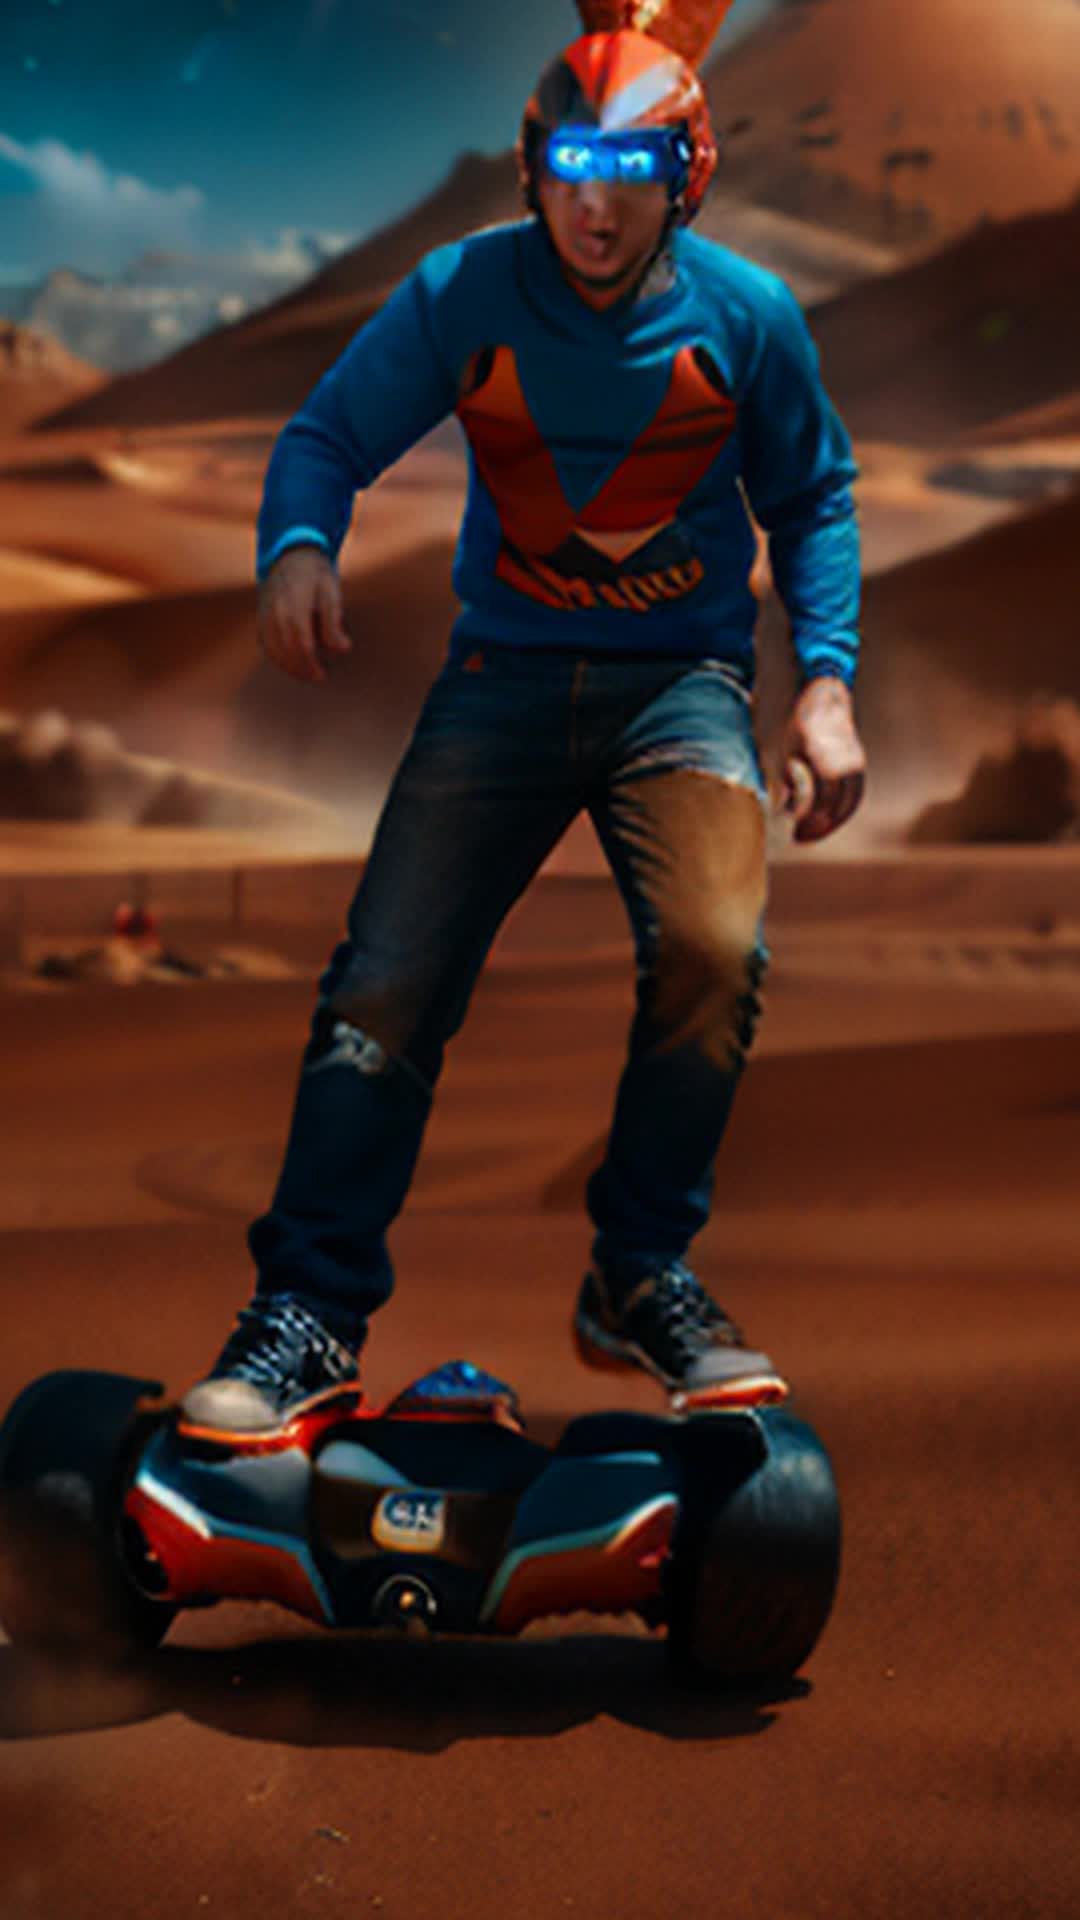 Jake performing 360-spin on hoverboard, red Martian soil, fragments whistling past, adrenaline-pumped, profit motivated, thrilling, cosmic storm, detailed, vivid colors, sharp focus